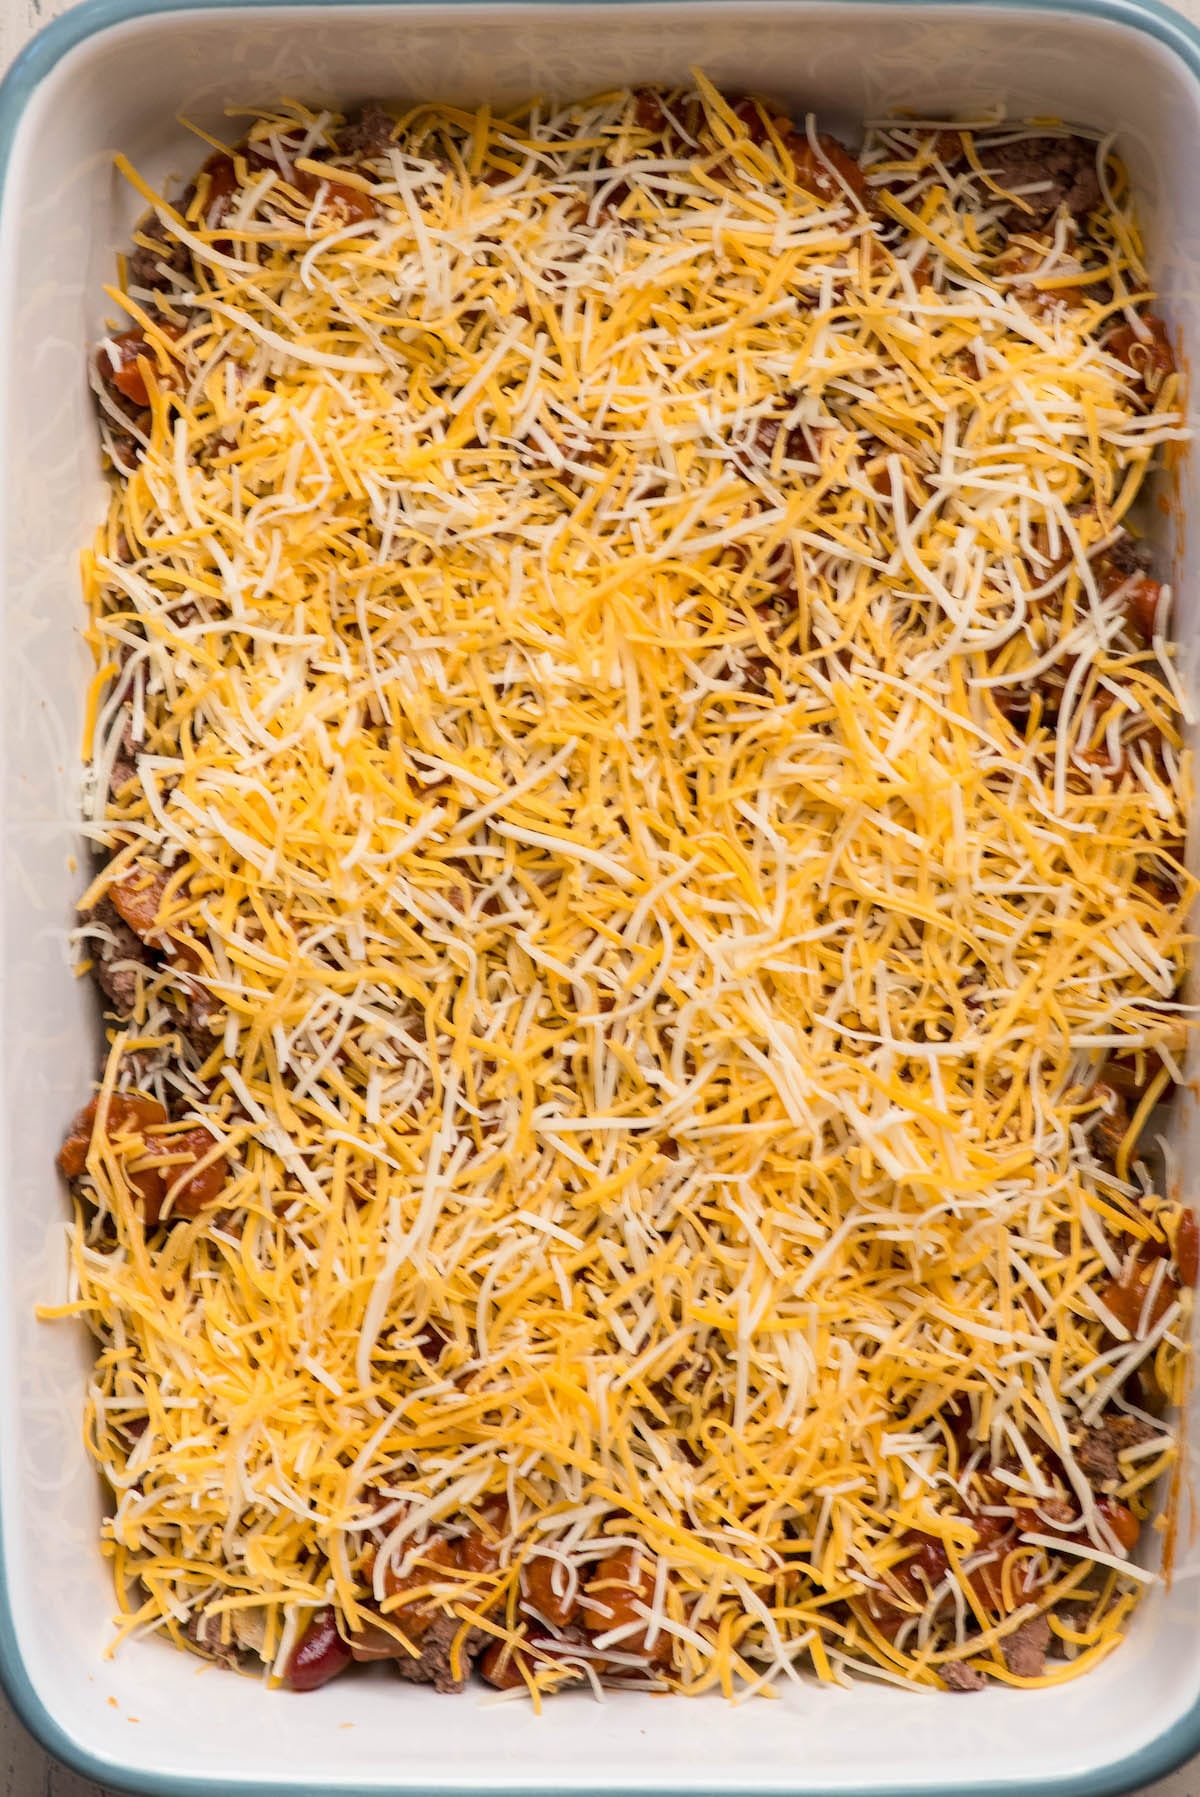 9 by 13 pan with shredded cheese over chili and beef